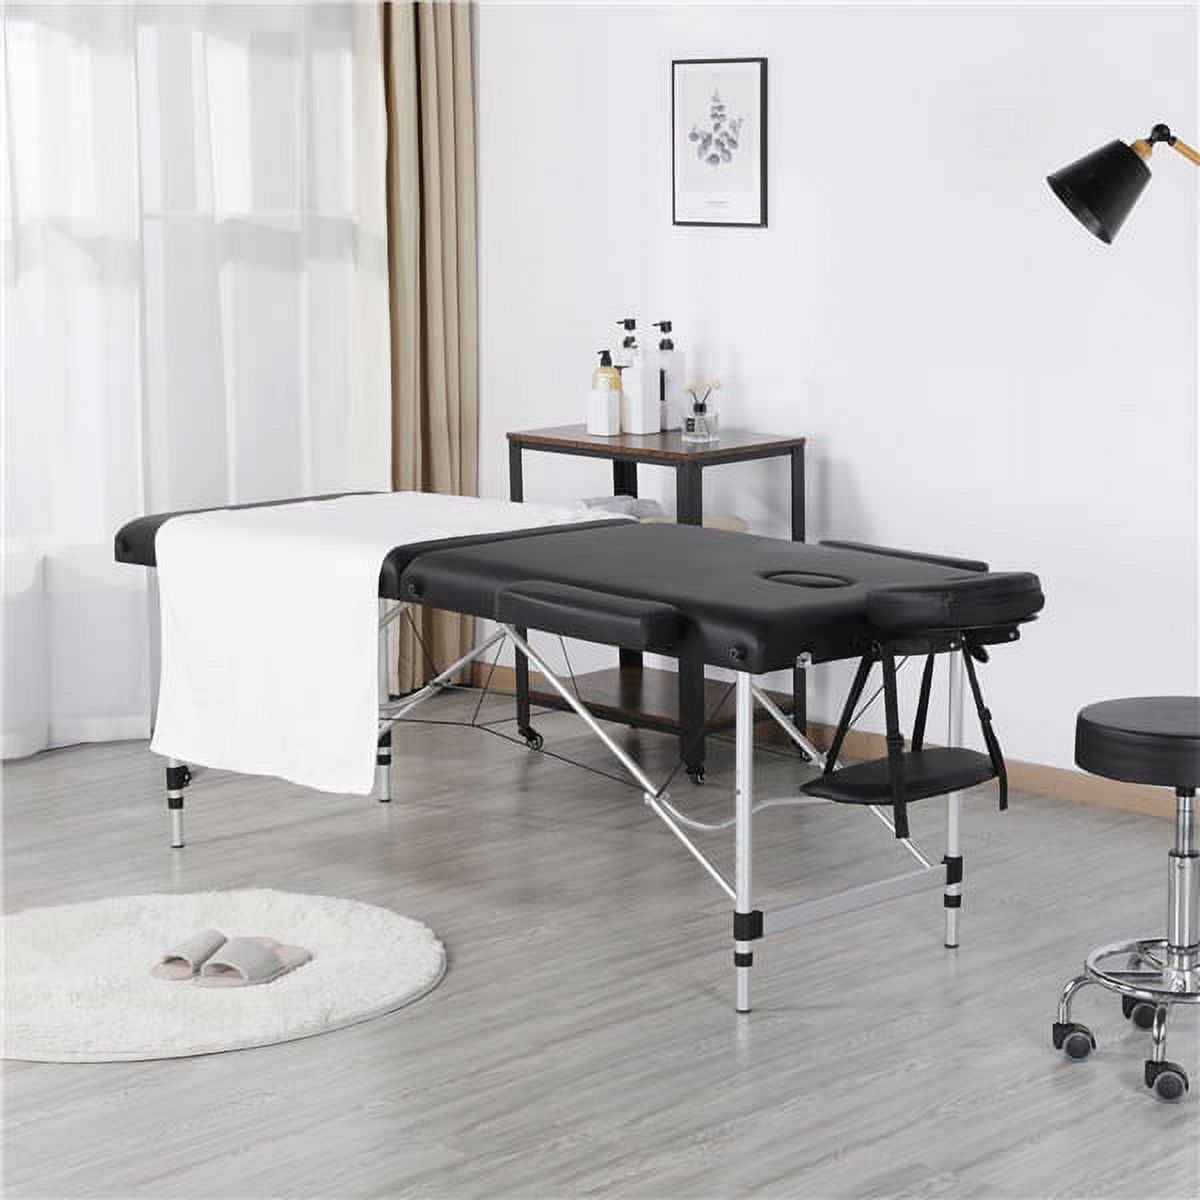 SmileMart 3 Section 84" Portable Adjustable Aluminum  Massage Table for Spa Treatments, Black - image 1 of 13